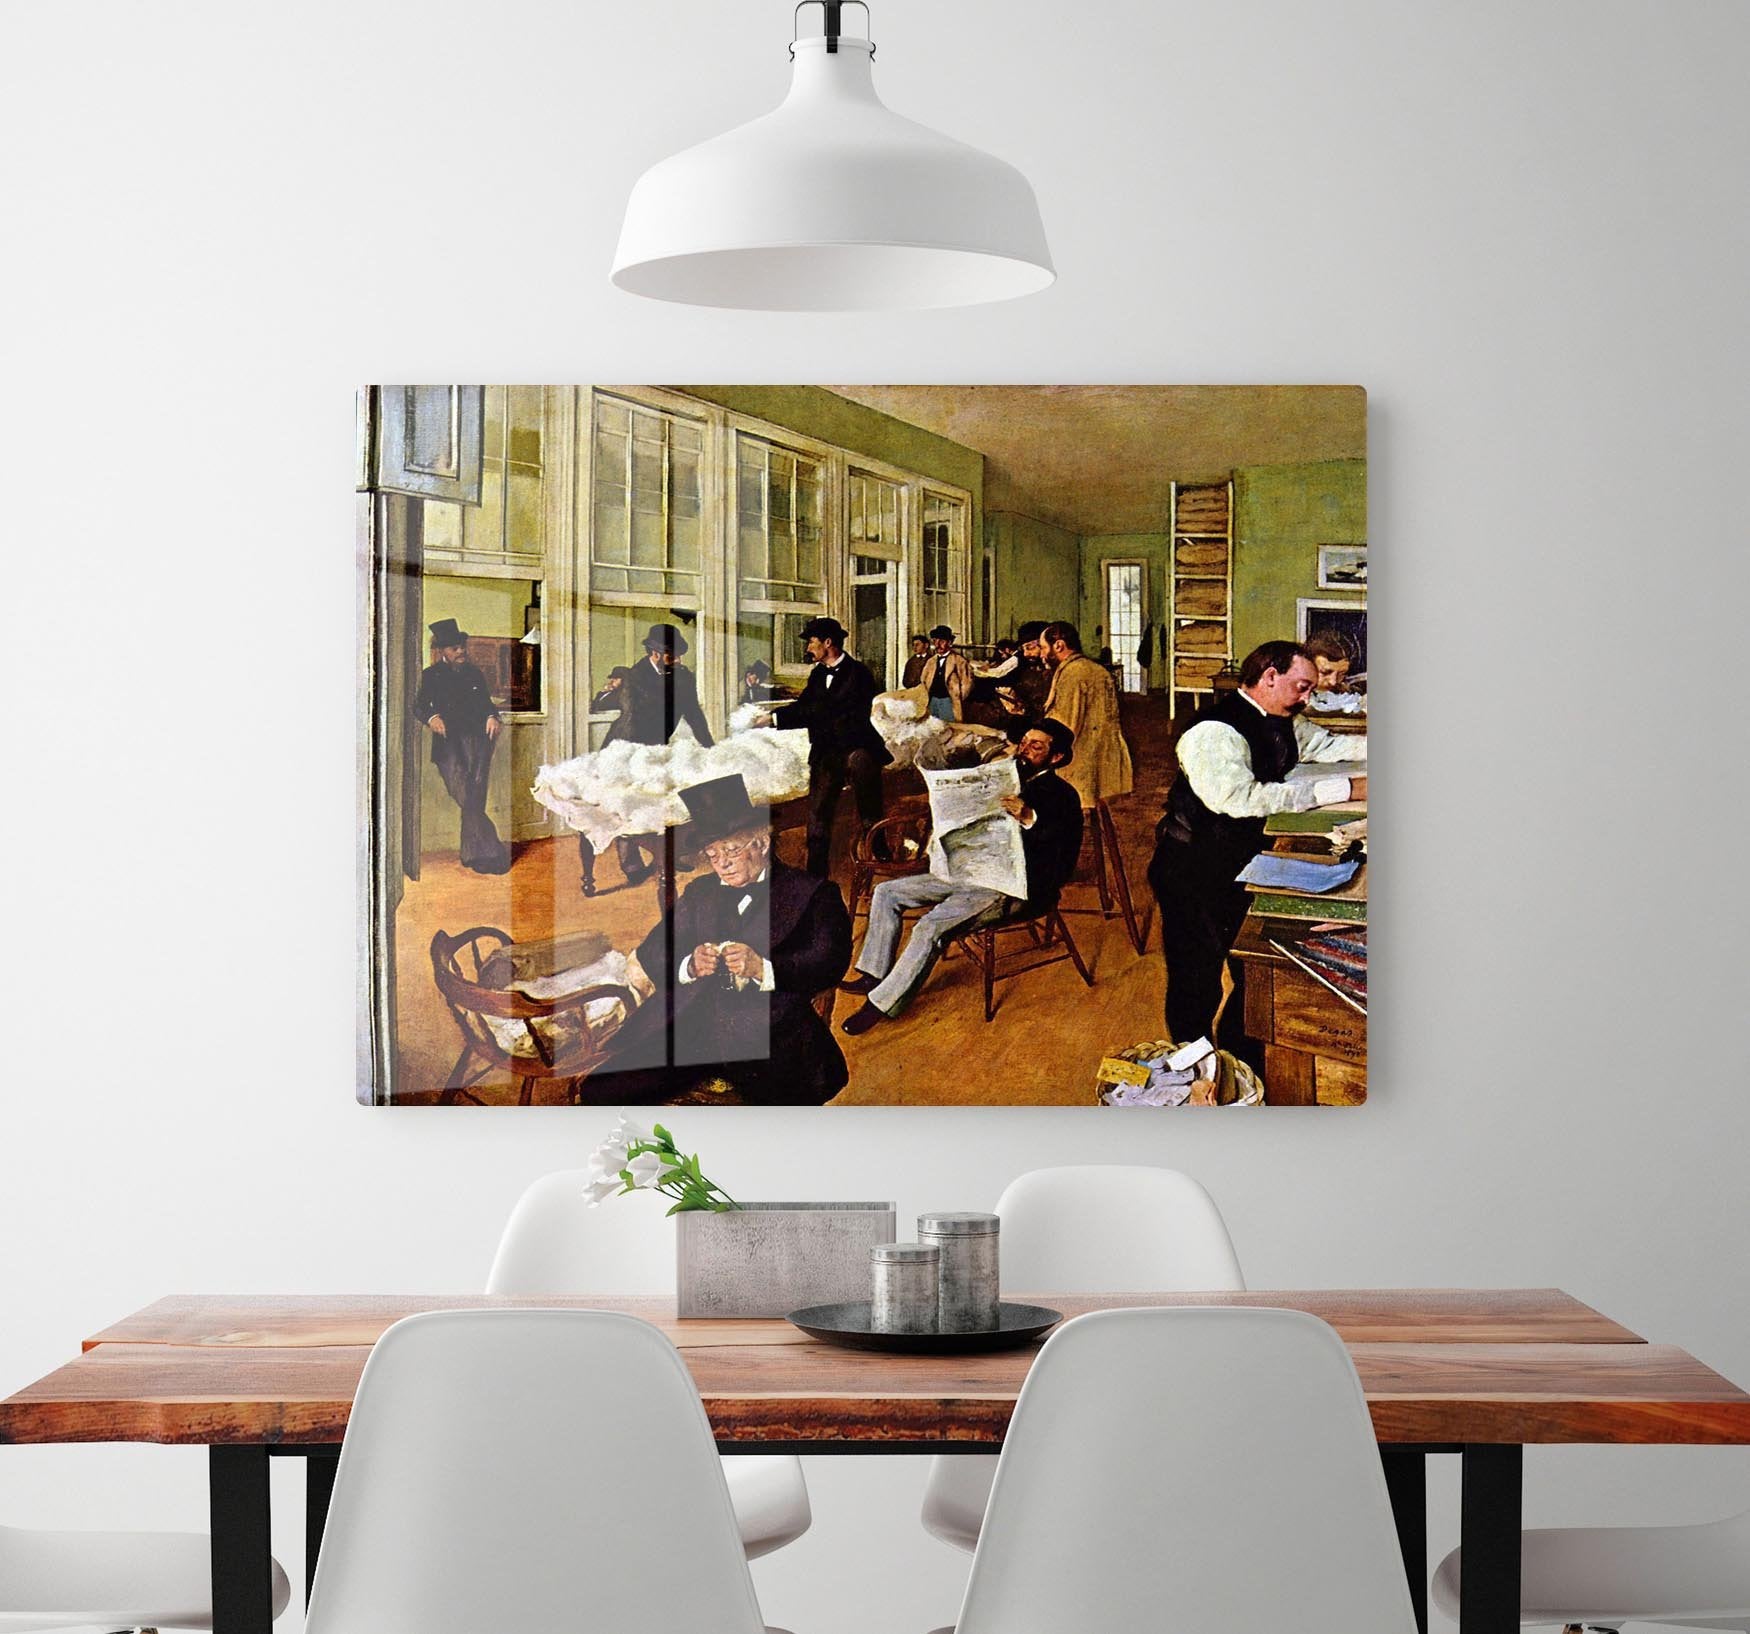 The cotton office in New Orleans by Degas HD Metal Print - Canvas Art Rocks - 2